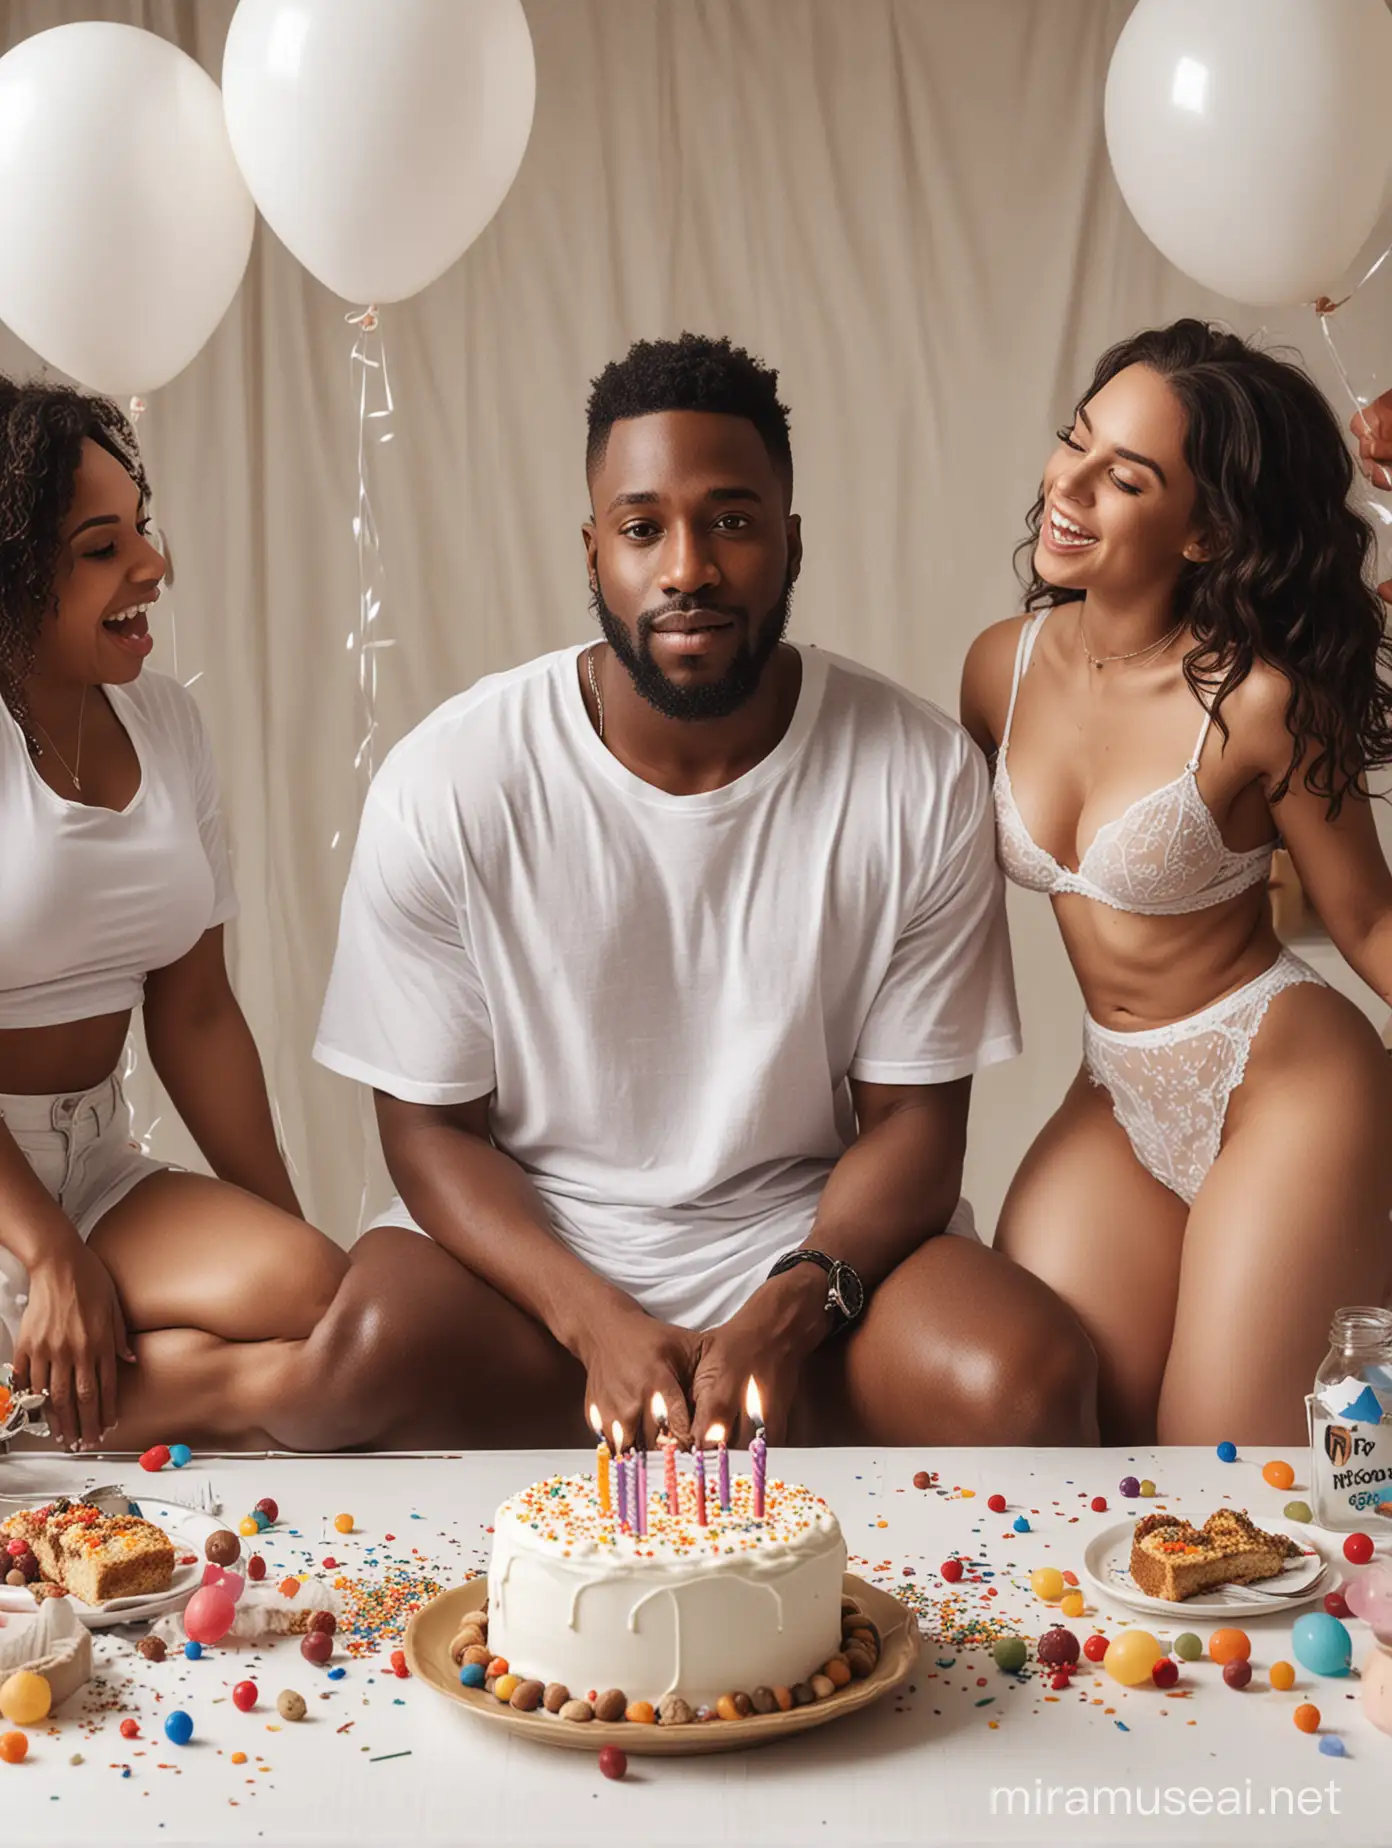 have a black man in a white tee sitting at a table and his birthday cake is in front of him.    then have two white naked woman with their breast out  on each side of him.   have rocks on the table as well with balloons in the air and party streams flying everywhere